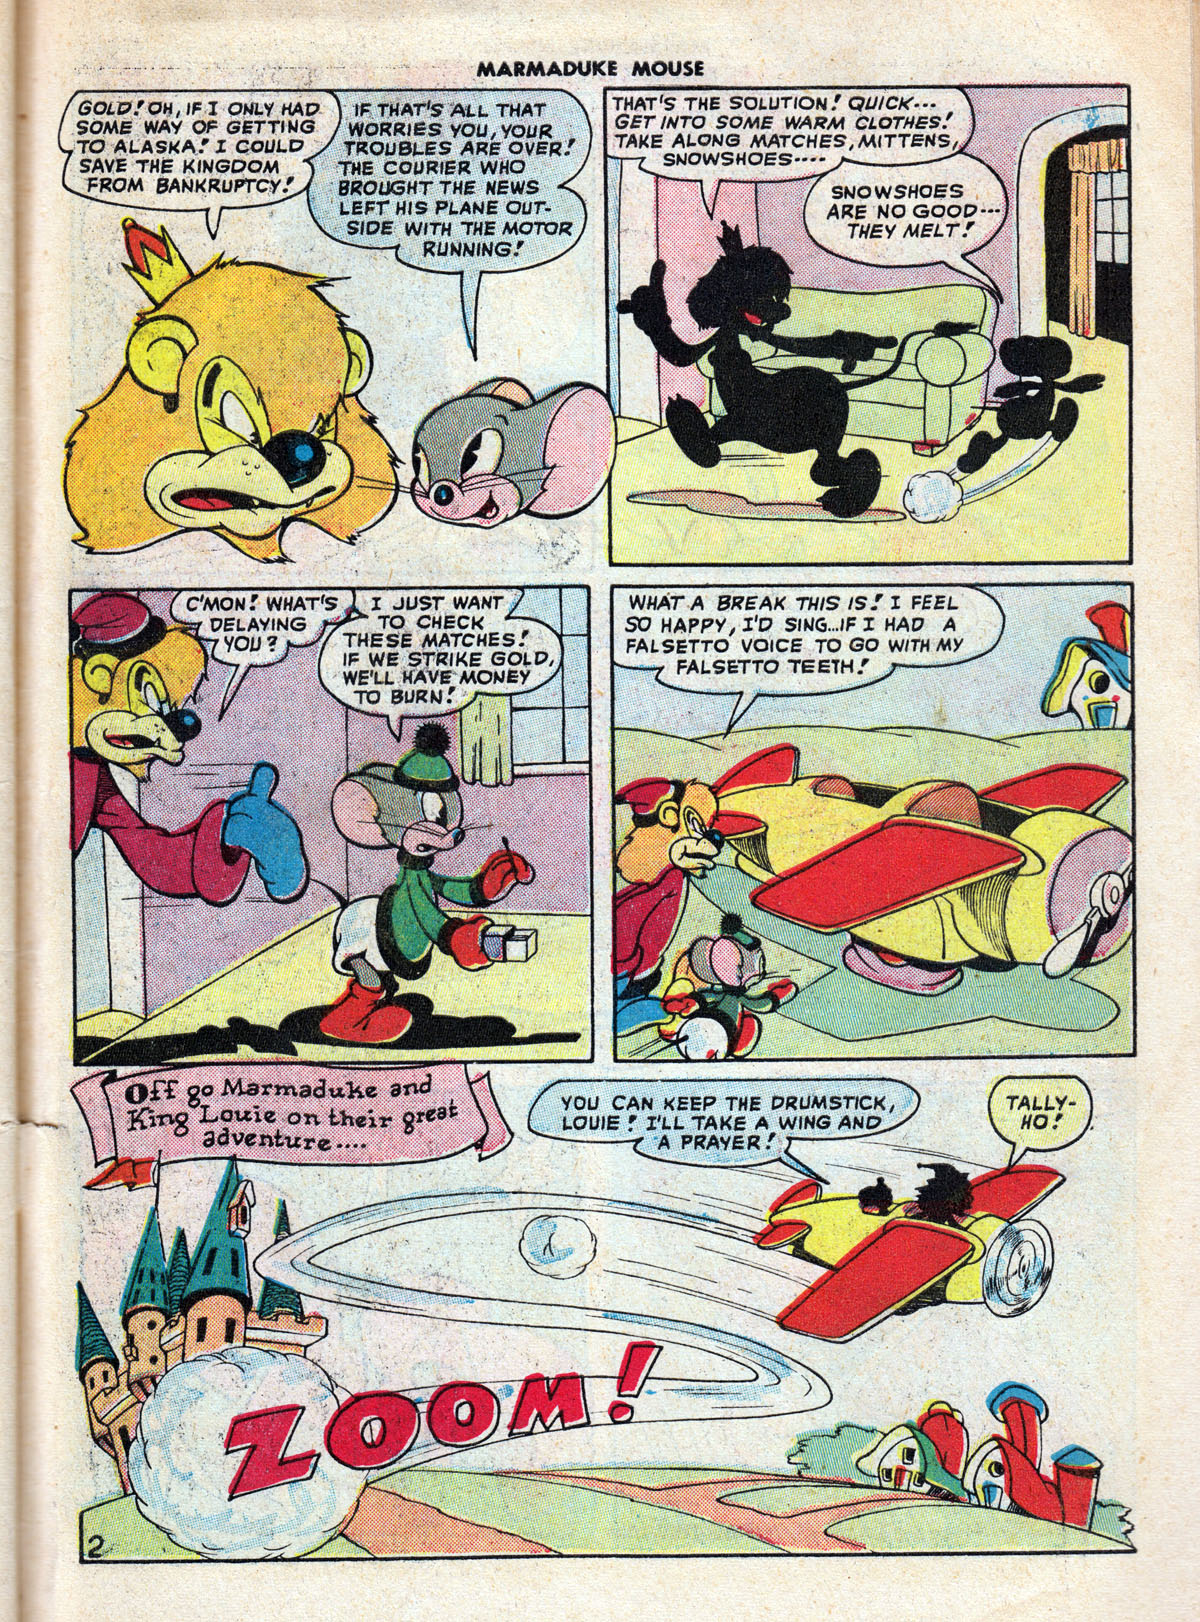 Read online Marmaduke Mouse comic -  Issue #10 - 45